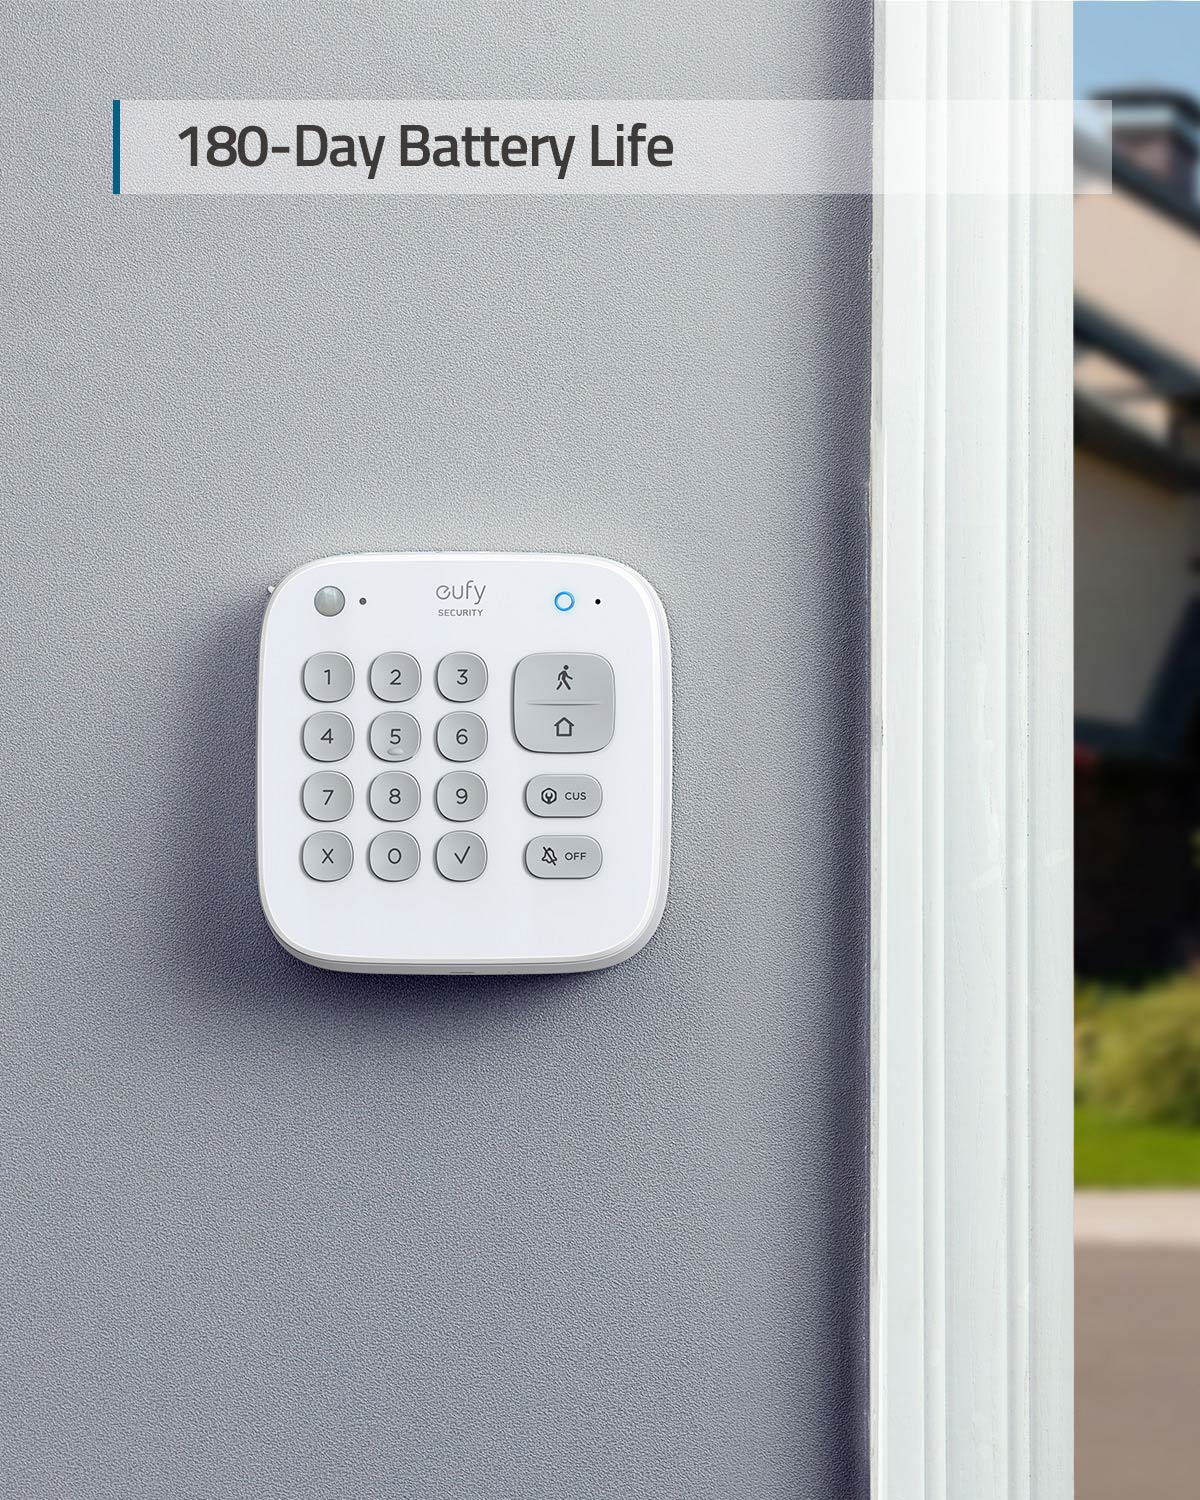 eufy Security Keypad Home Security System Home Alarm System 180-Day Battery Home & Away Security Modes Link to eufyCam